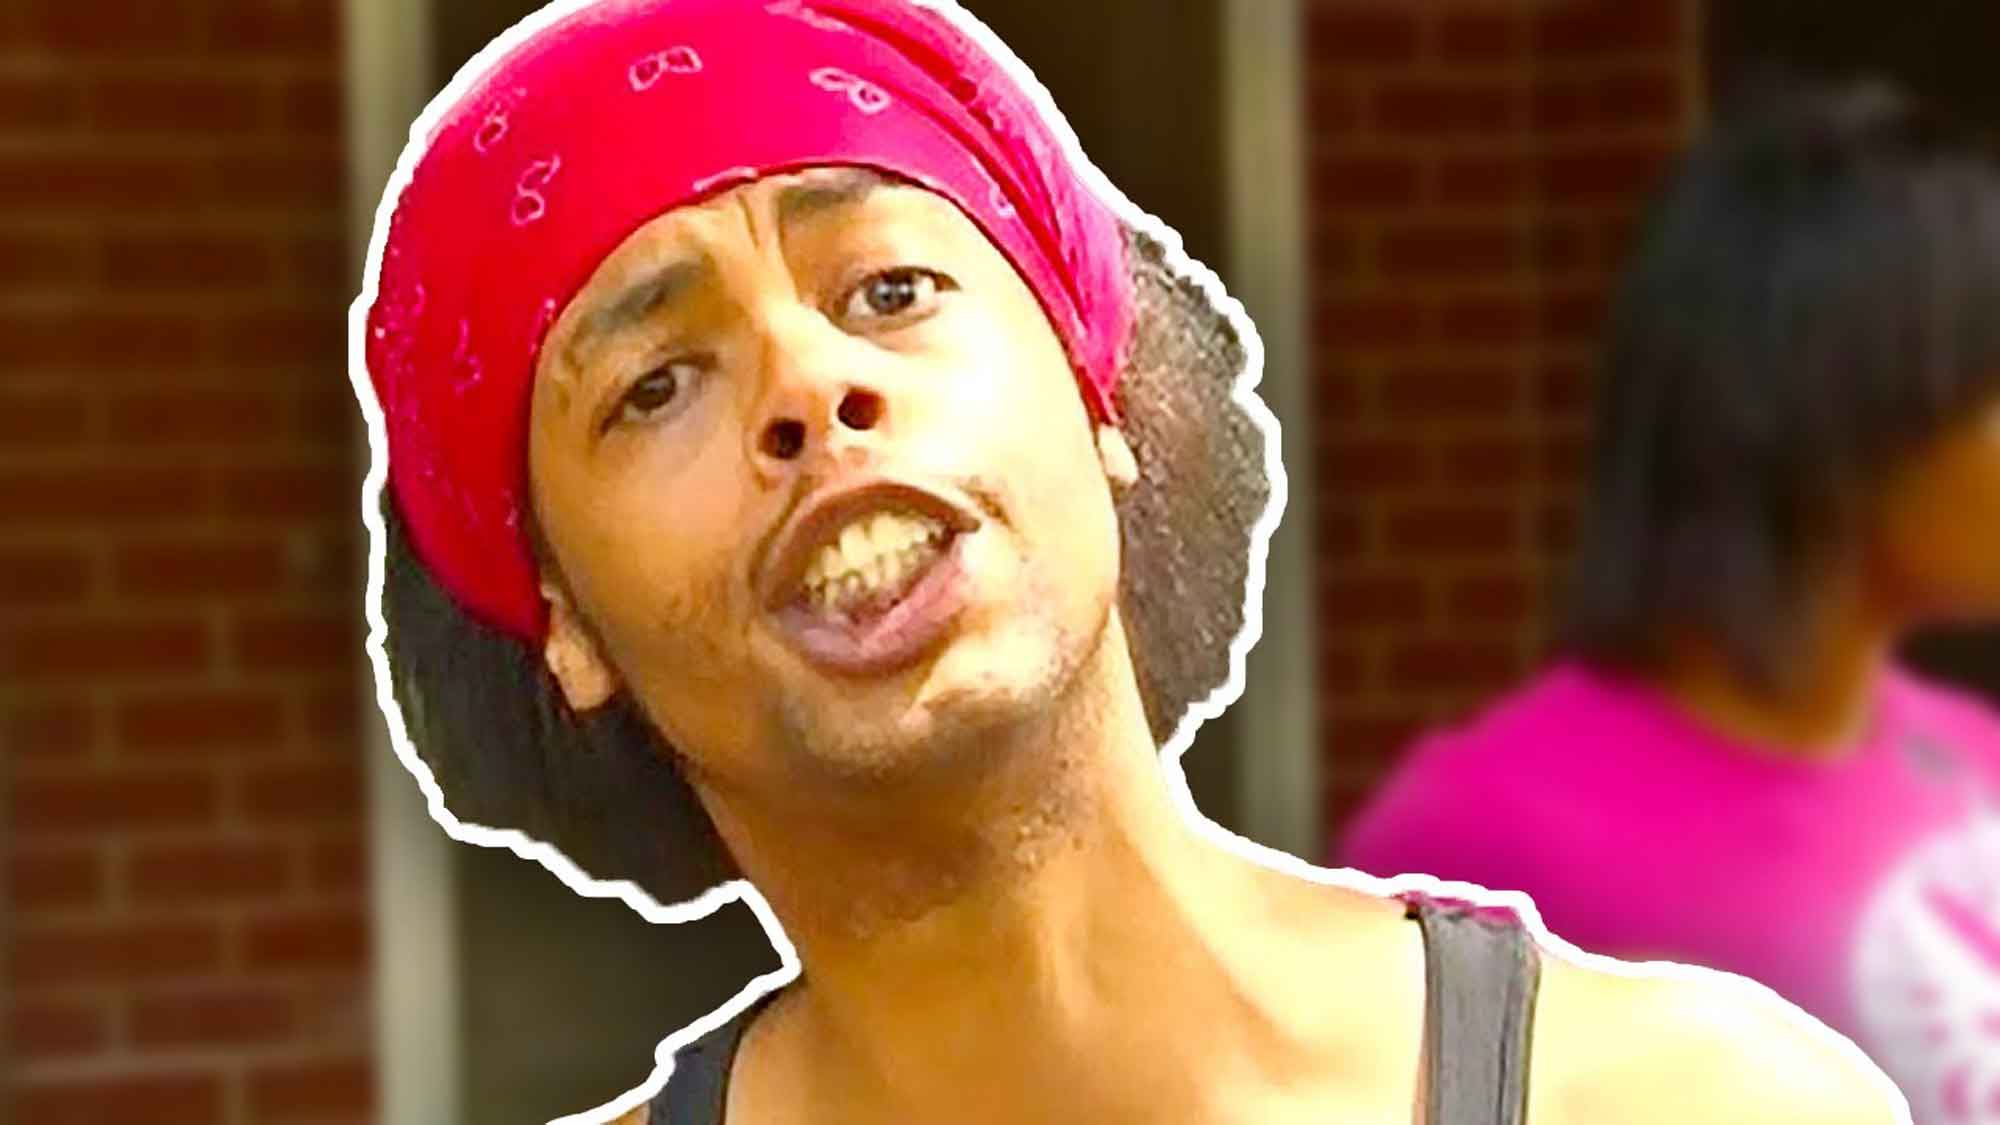 Bed Intruder Song by Antoine Dodson and The Gregory Brothers